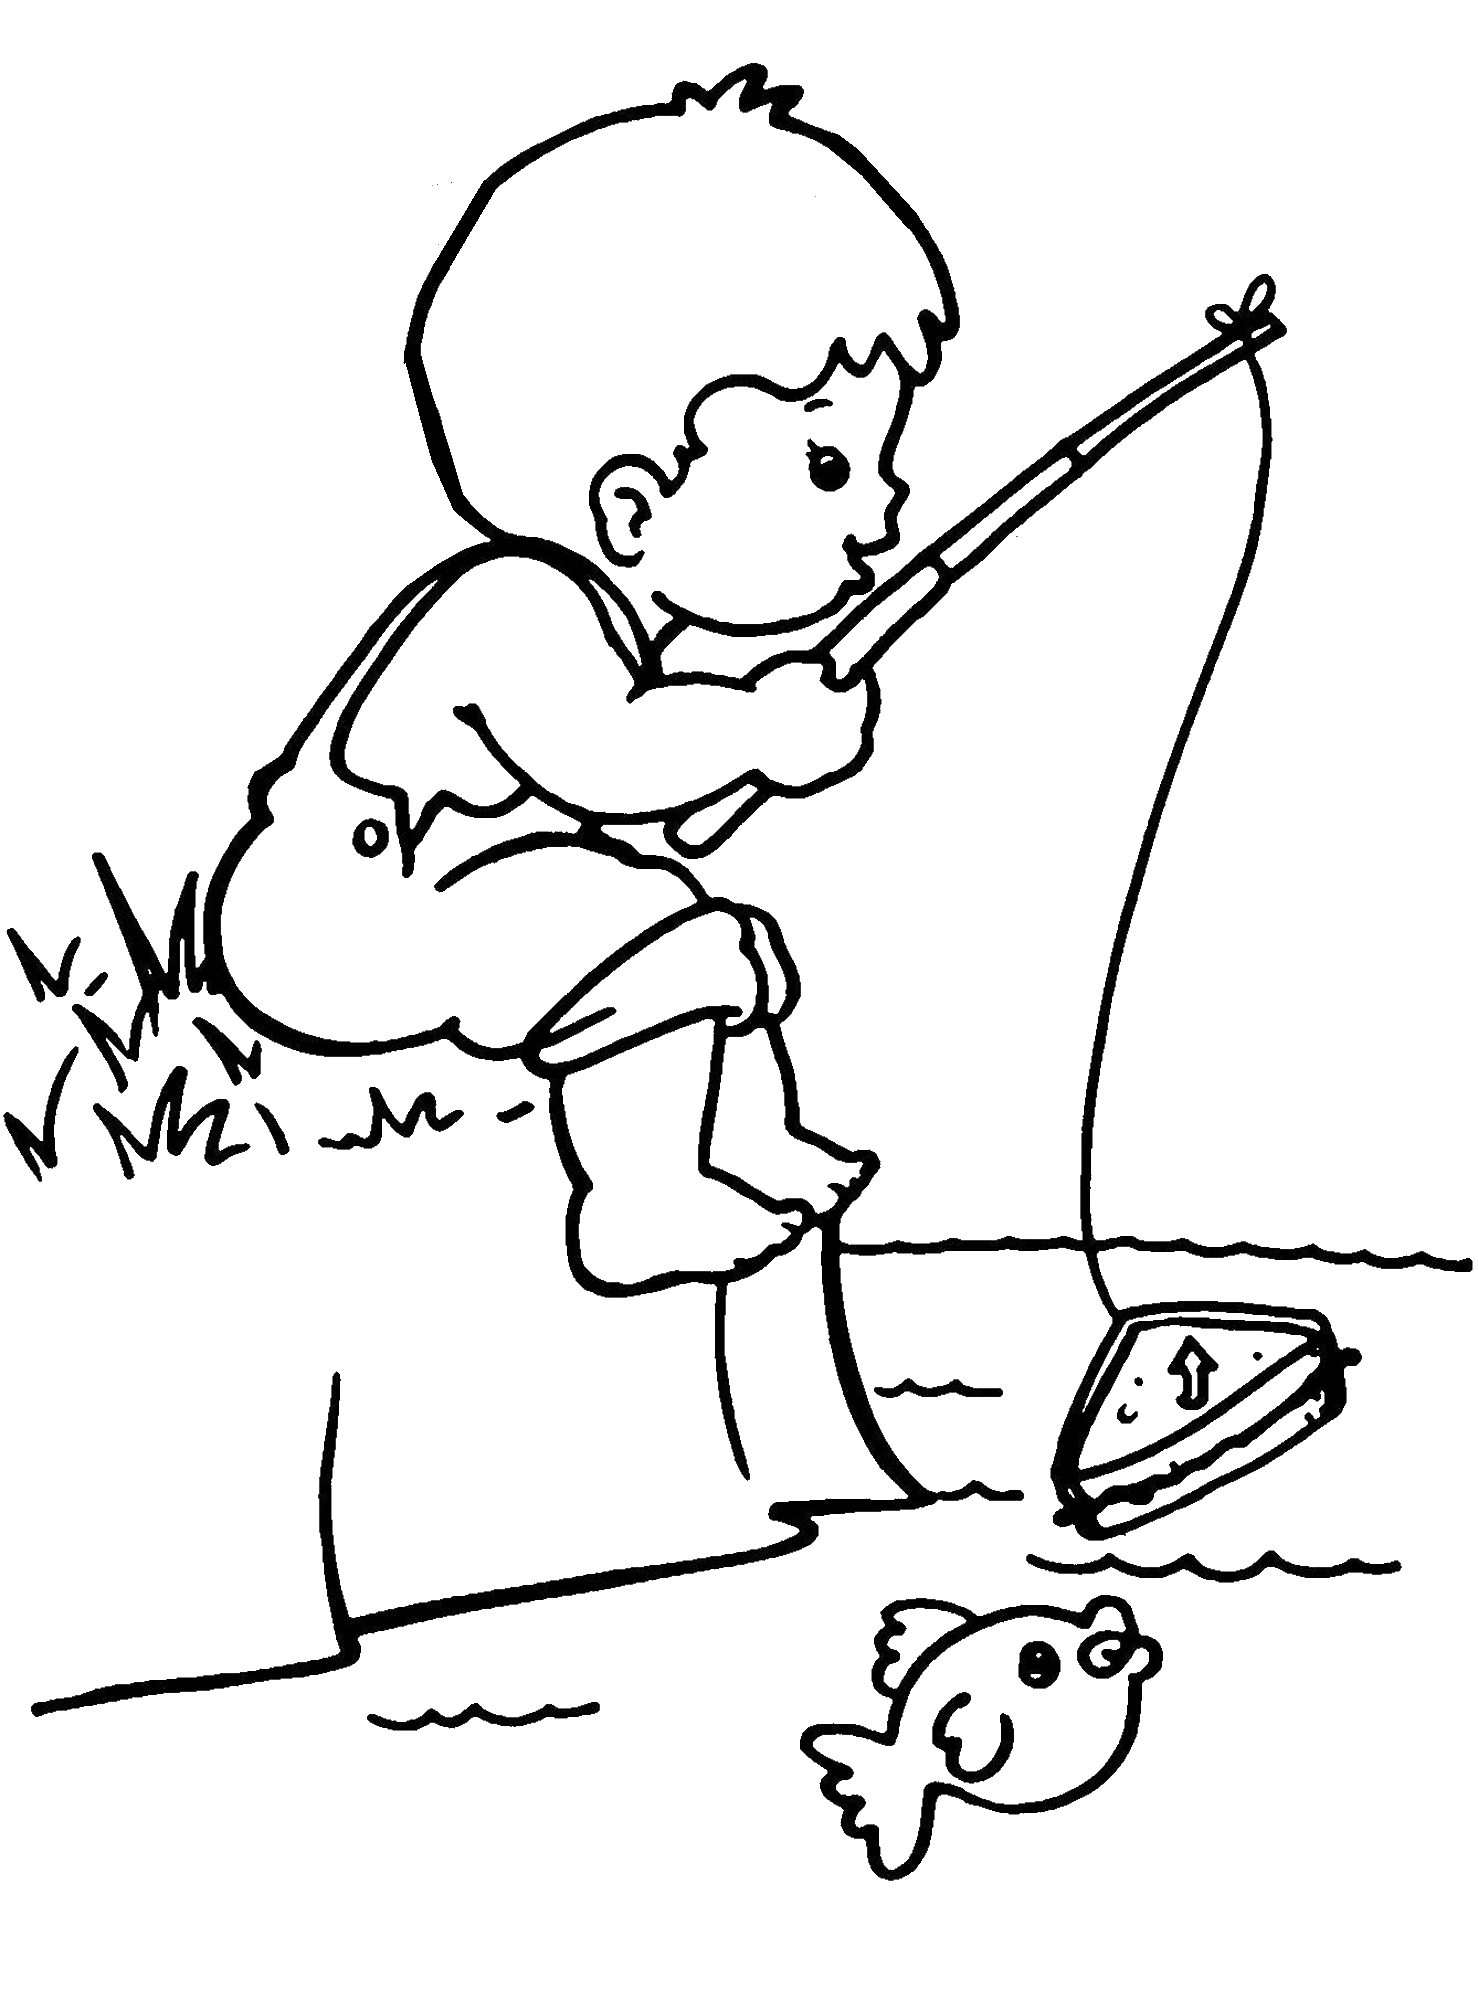 Fish clipart fishing rod. Little girl line drawing